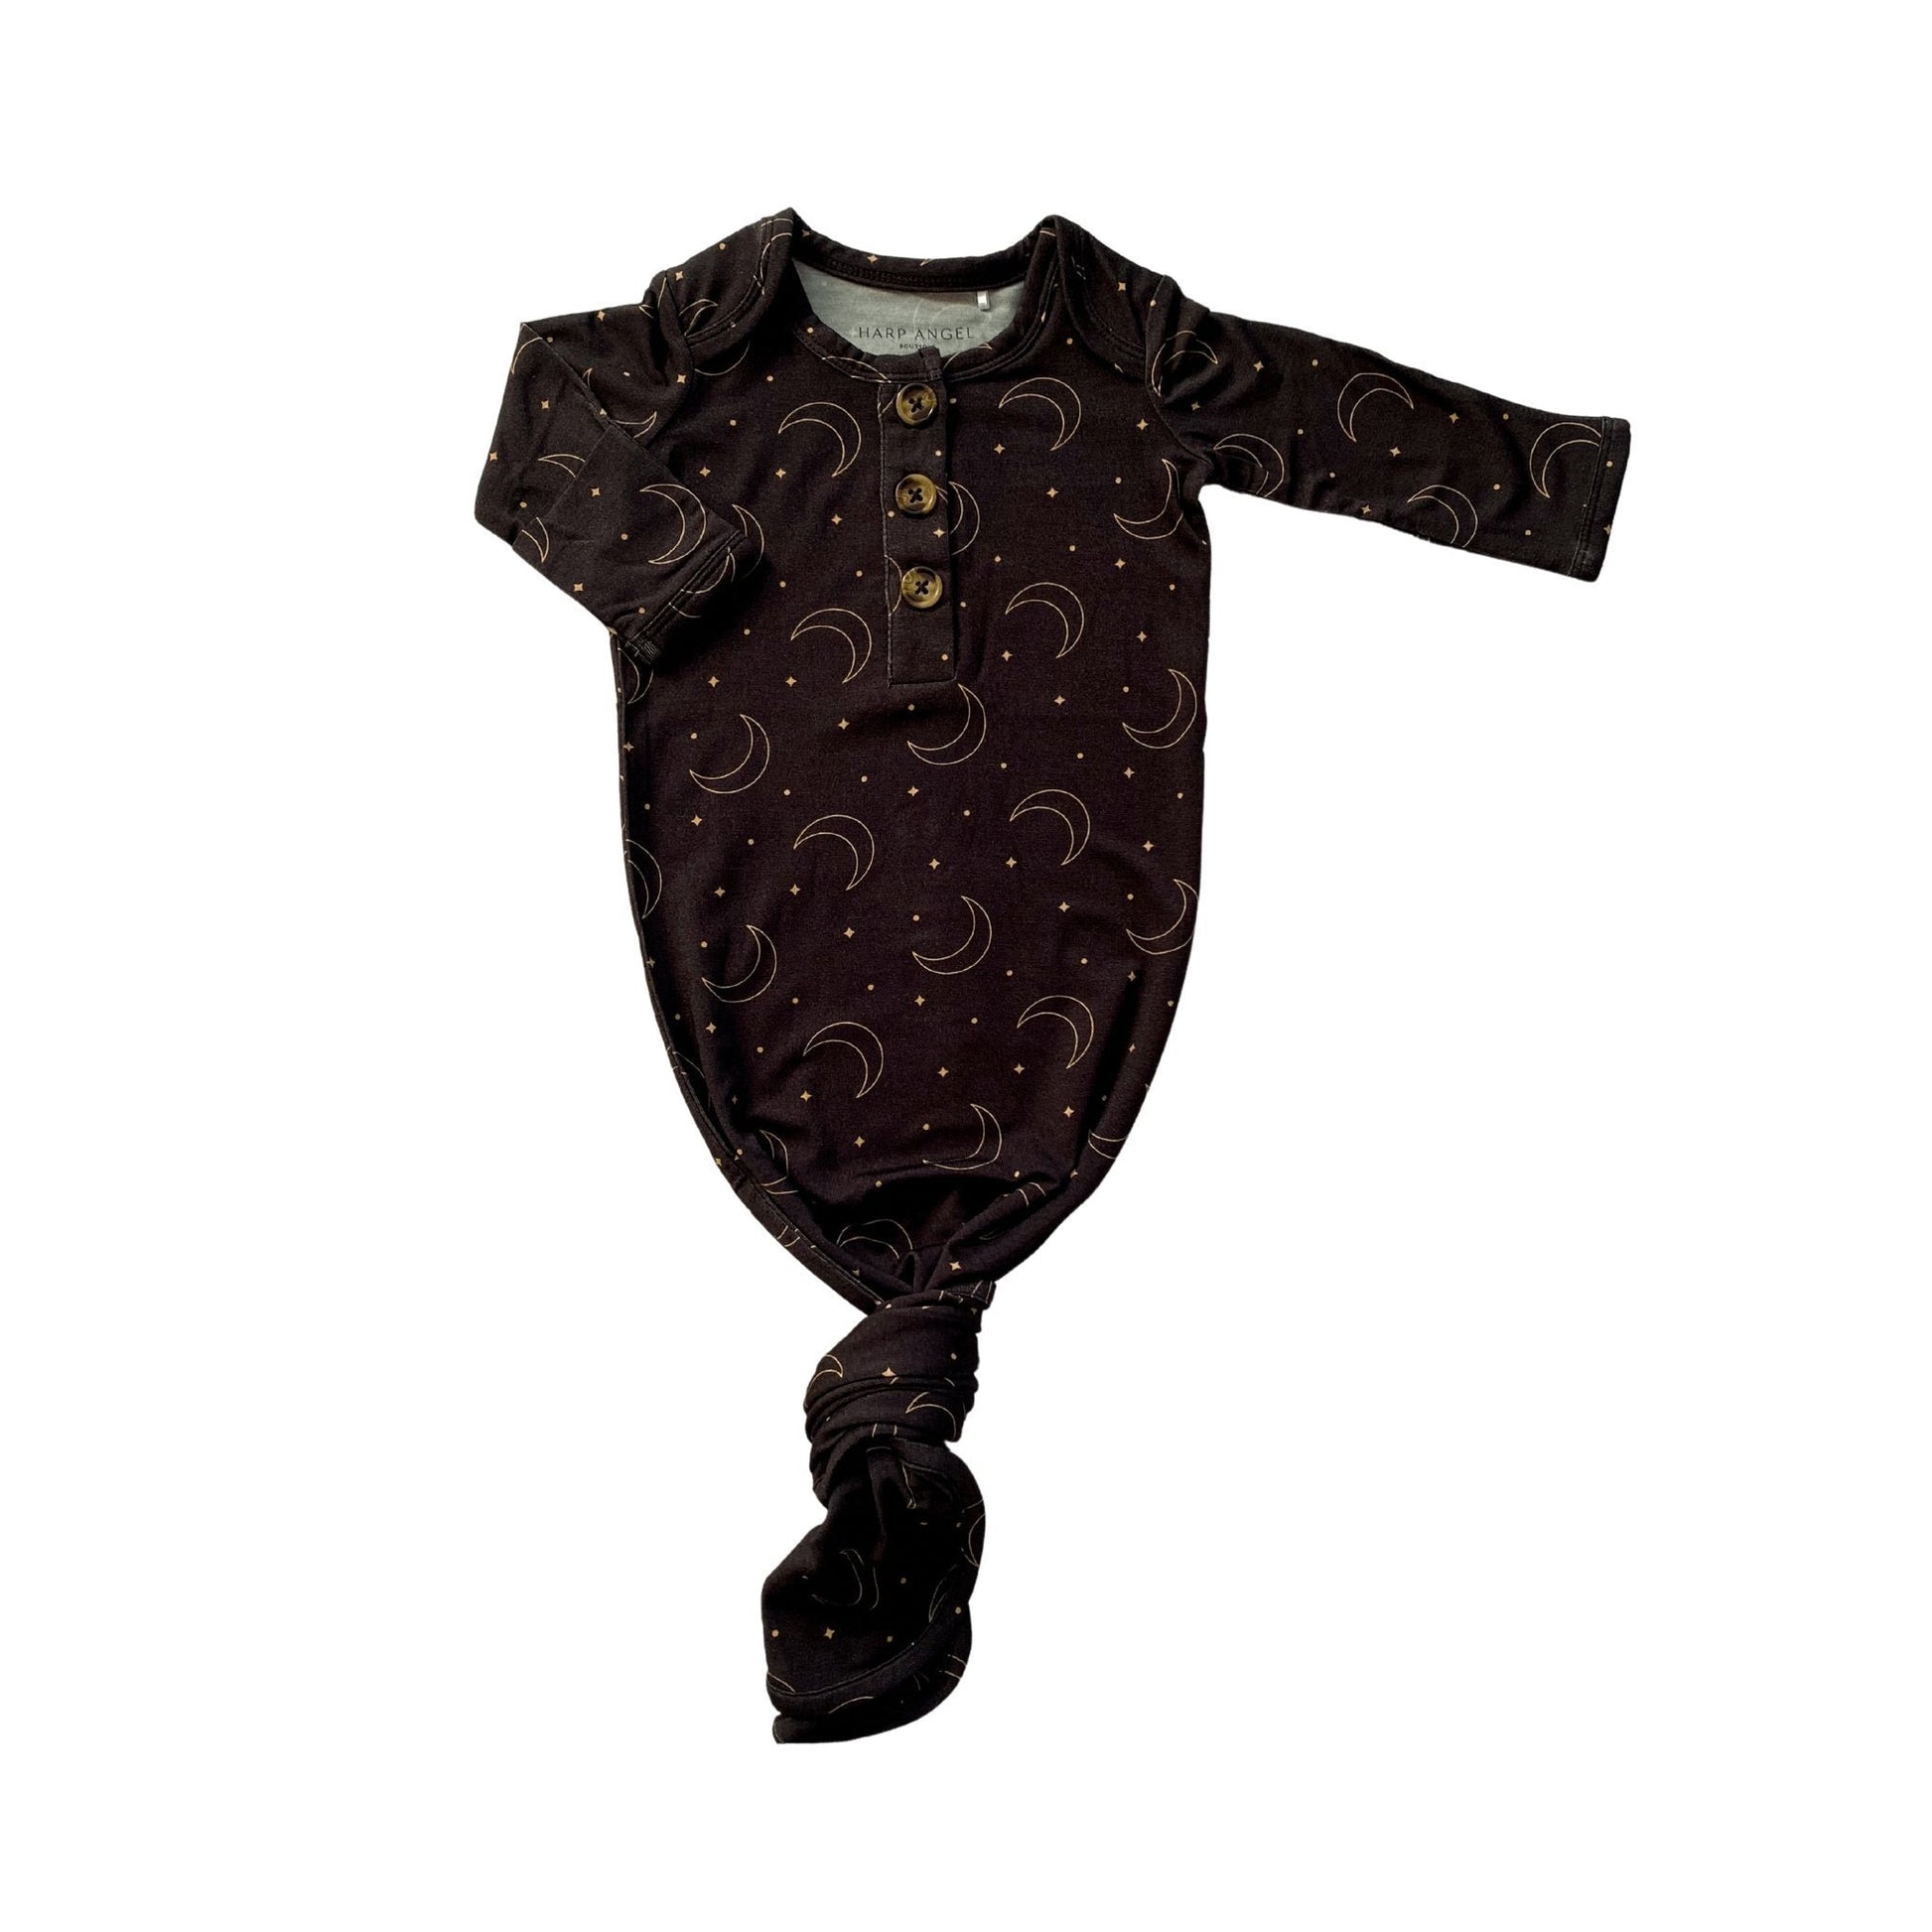 Knotted Baby Gown - Midnight Moon - Harp Angel Boutique